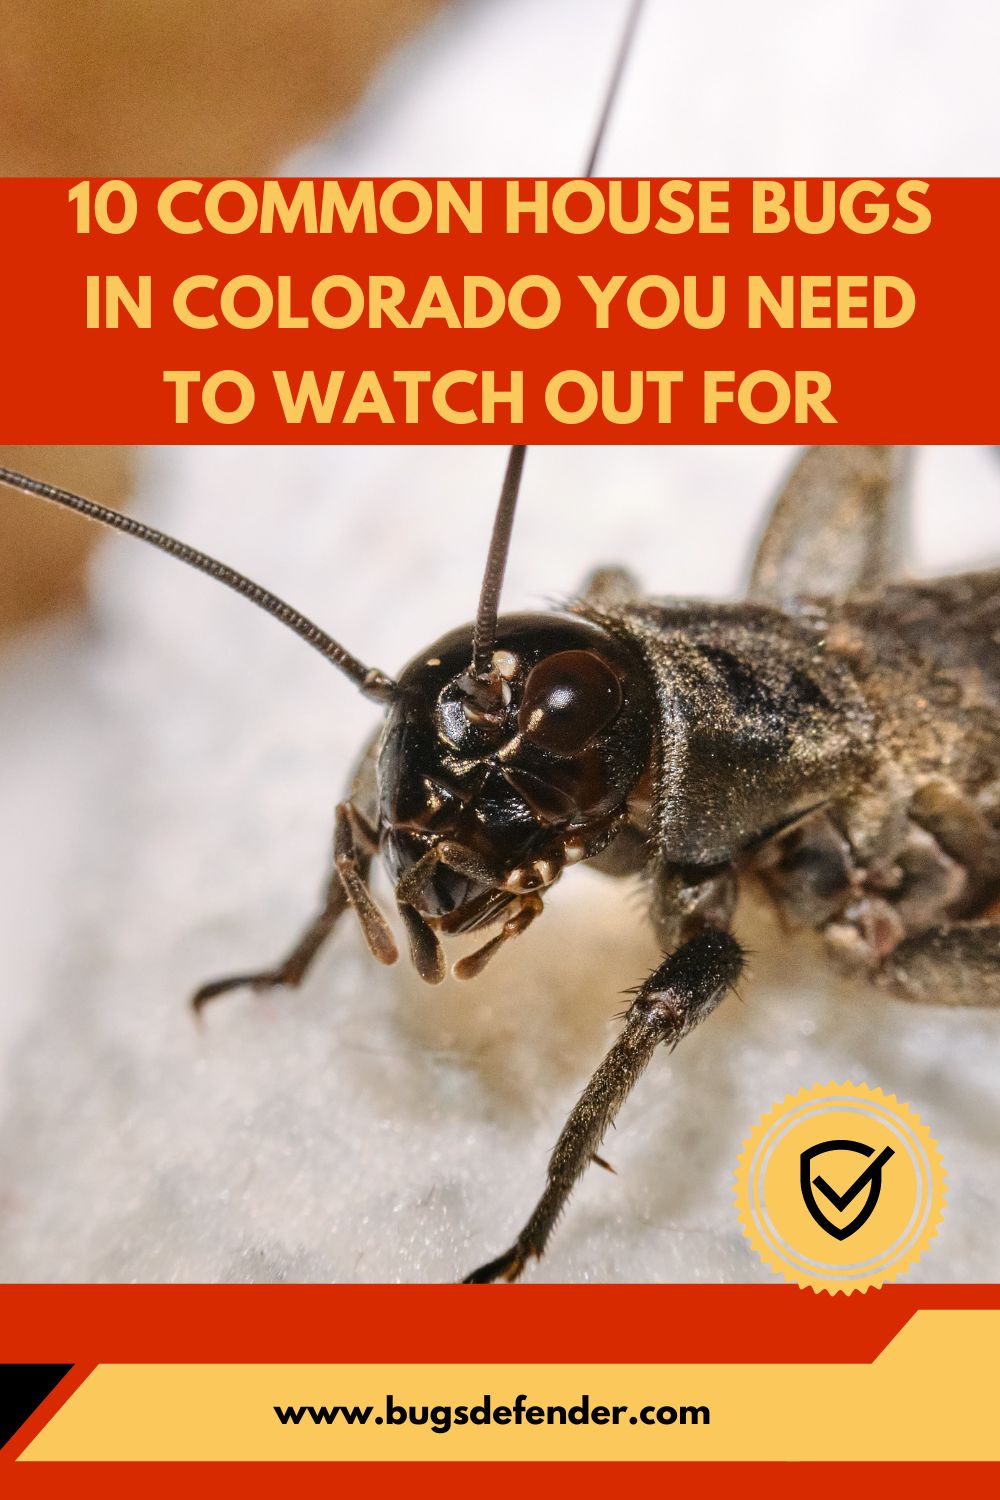 10 Common House Bugs In Colorado You Need To Watch Out For pin 1